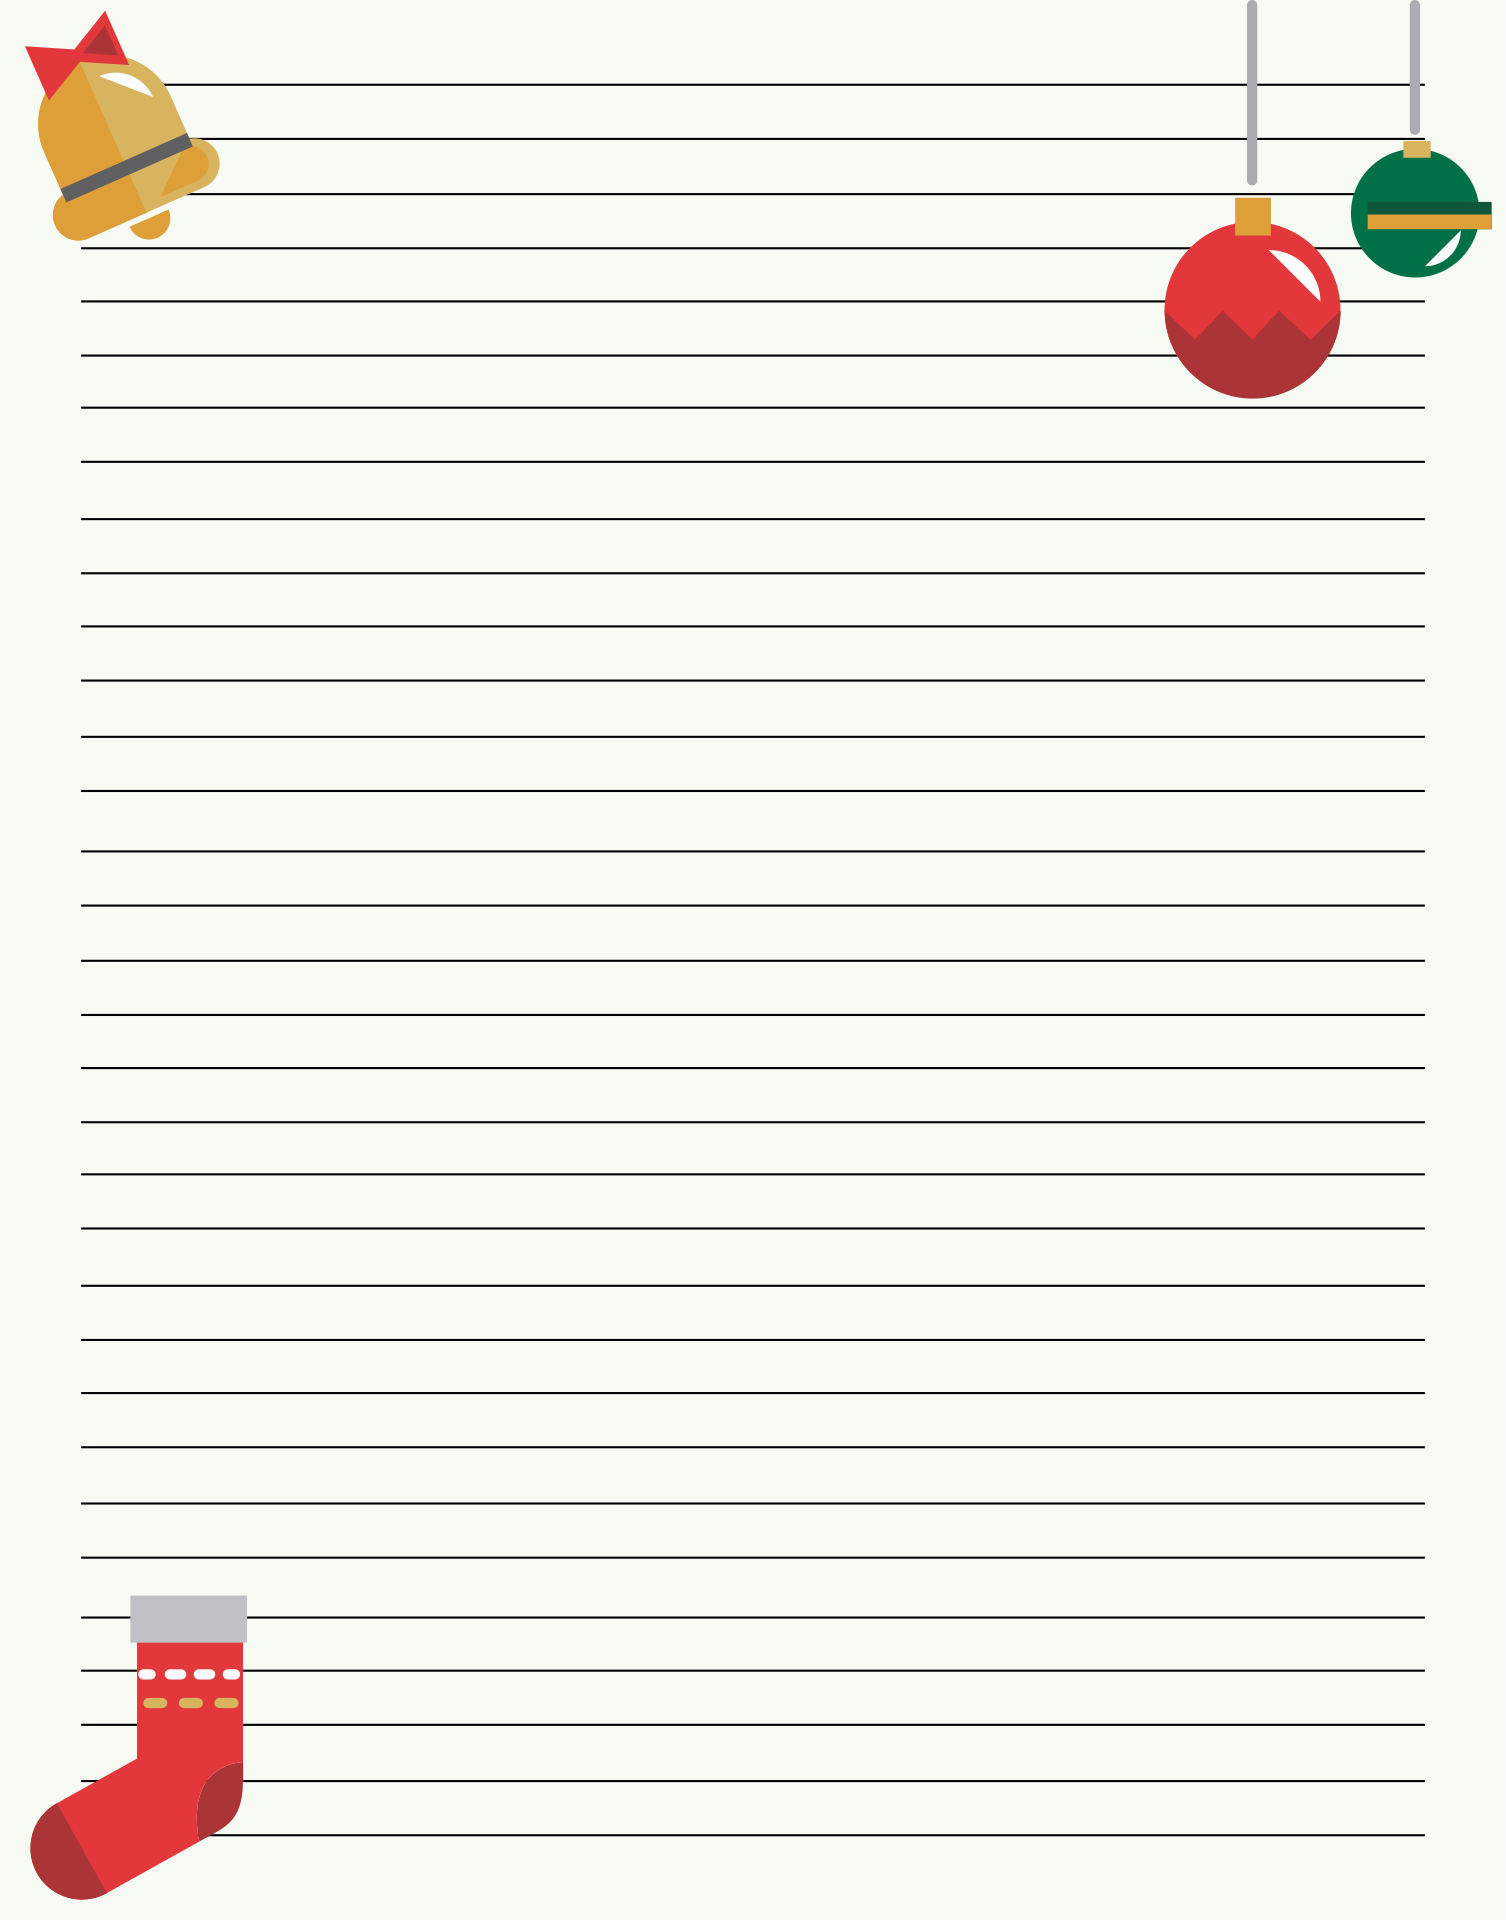 8 Best Images of Free Printable Christmas Stationery Designs Free